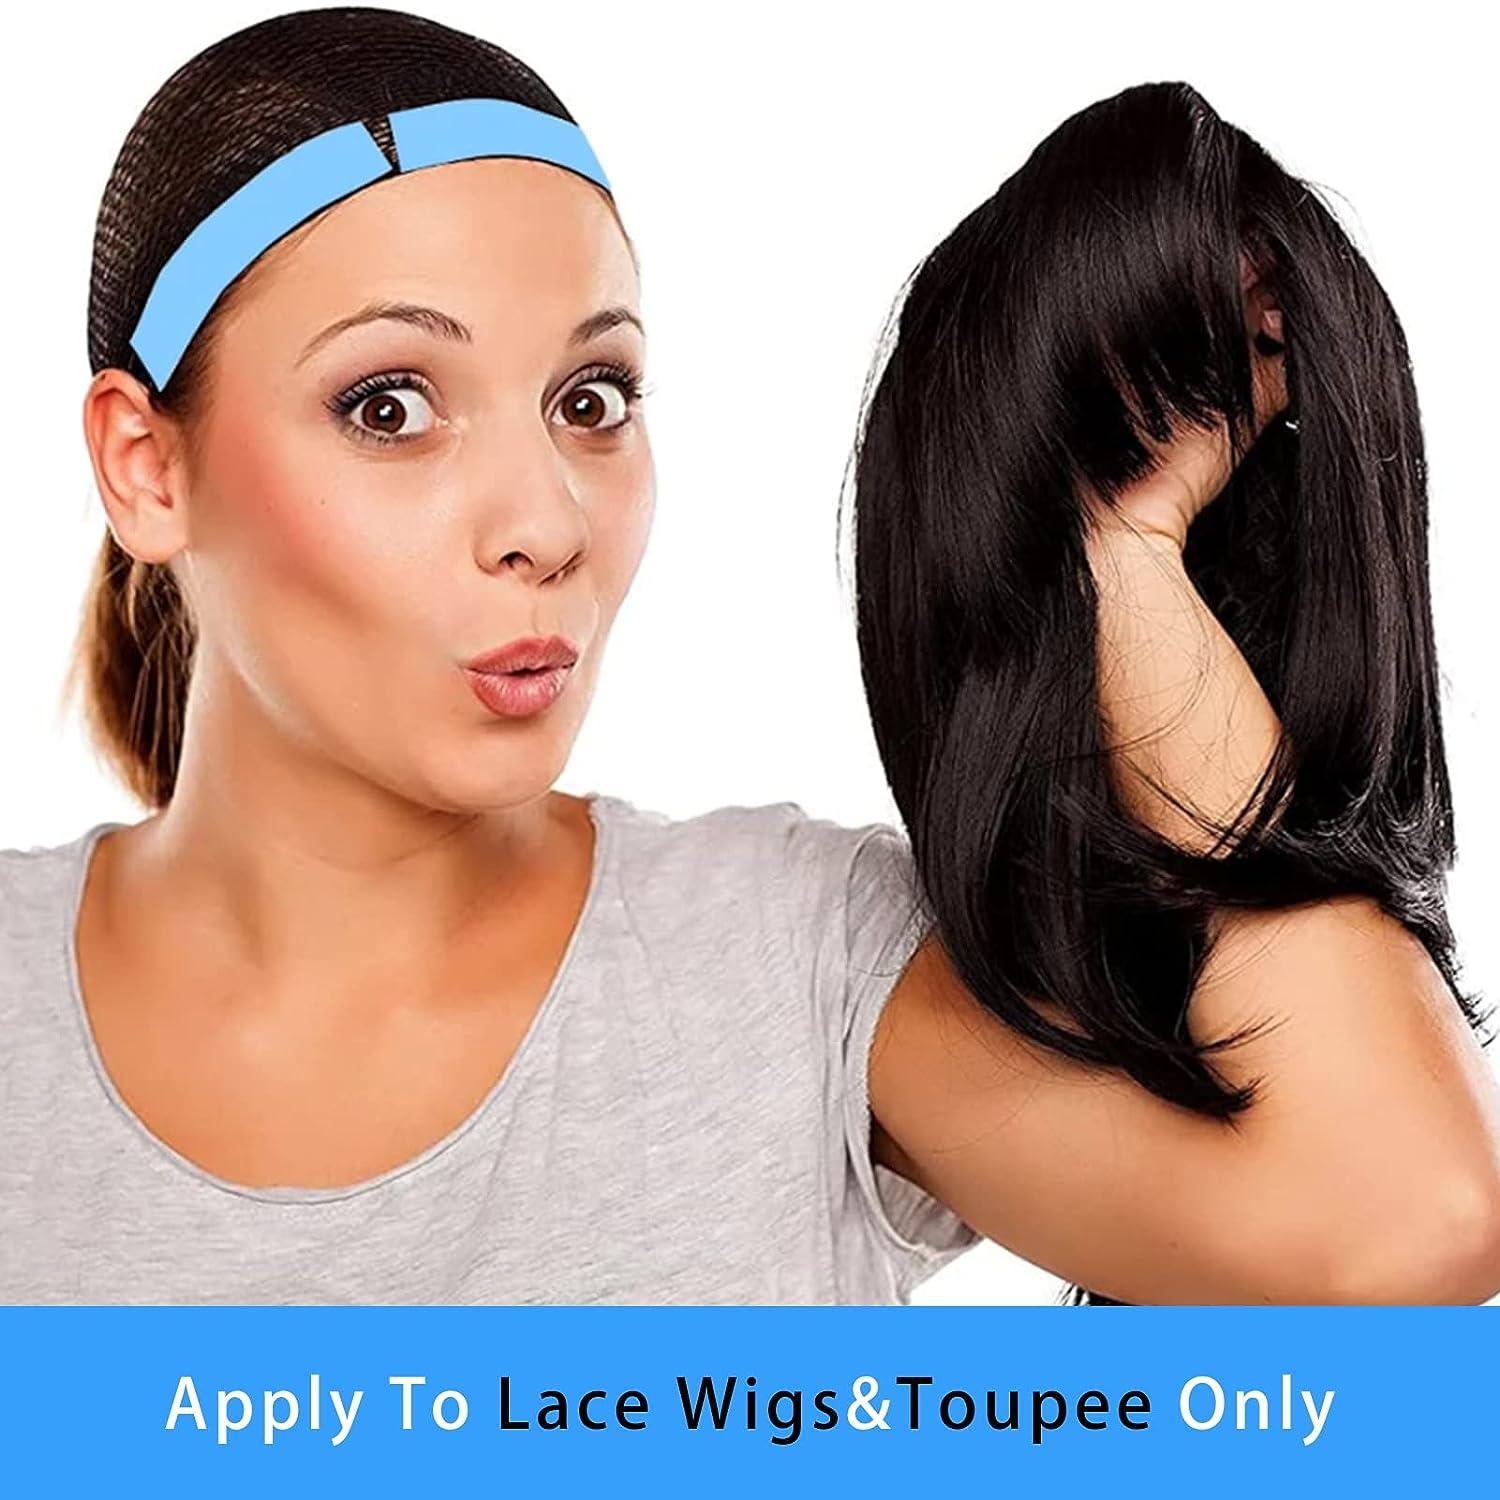  CREATE BEAUTY Lace Front Wig Tape - 36 Pieces, Water-Proof  Strong Adhesive Double Sided Lace Wigs Tape (Blue) : Beauty & Personal Care